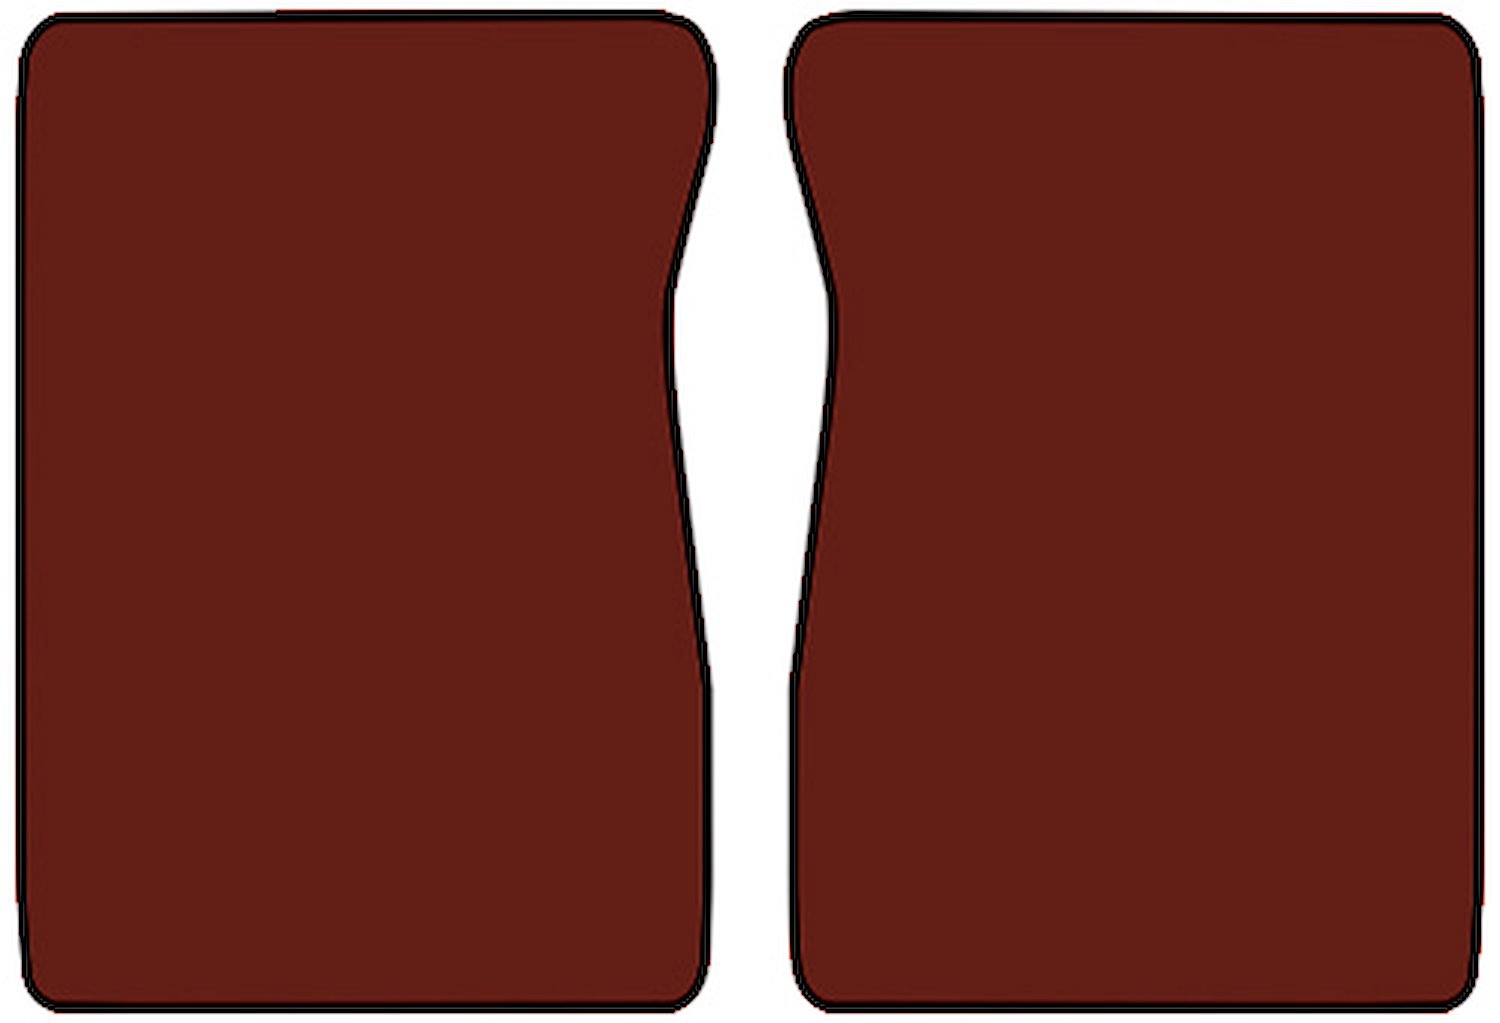 Molded Cut Pile Floor Mats for 1974 C/K Series Chevrolet and GMC Trucks [2-Piece, Automatic/4-Speed, Maple]